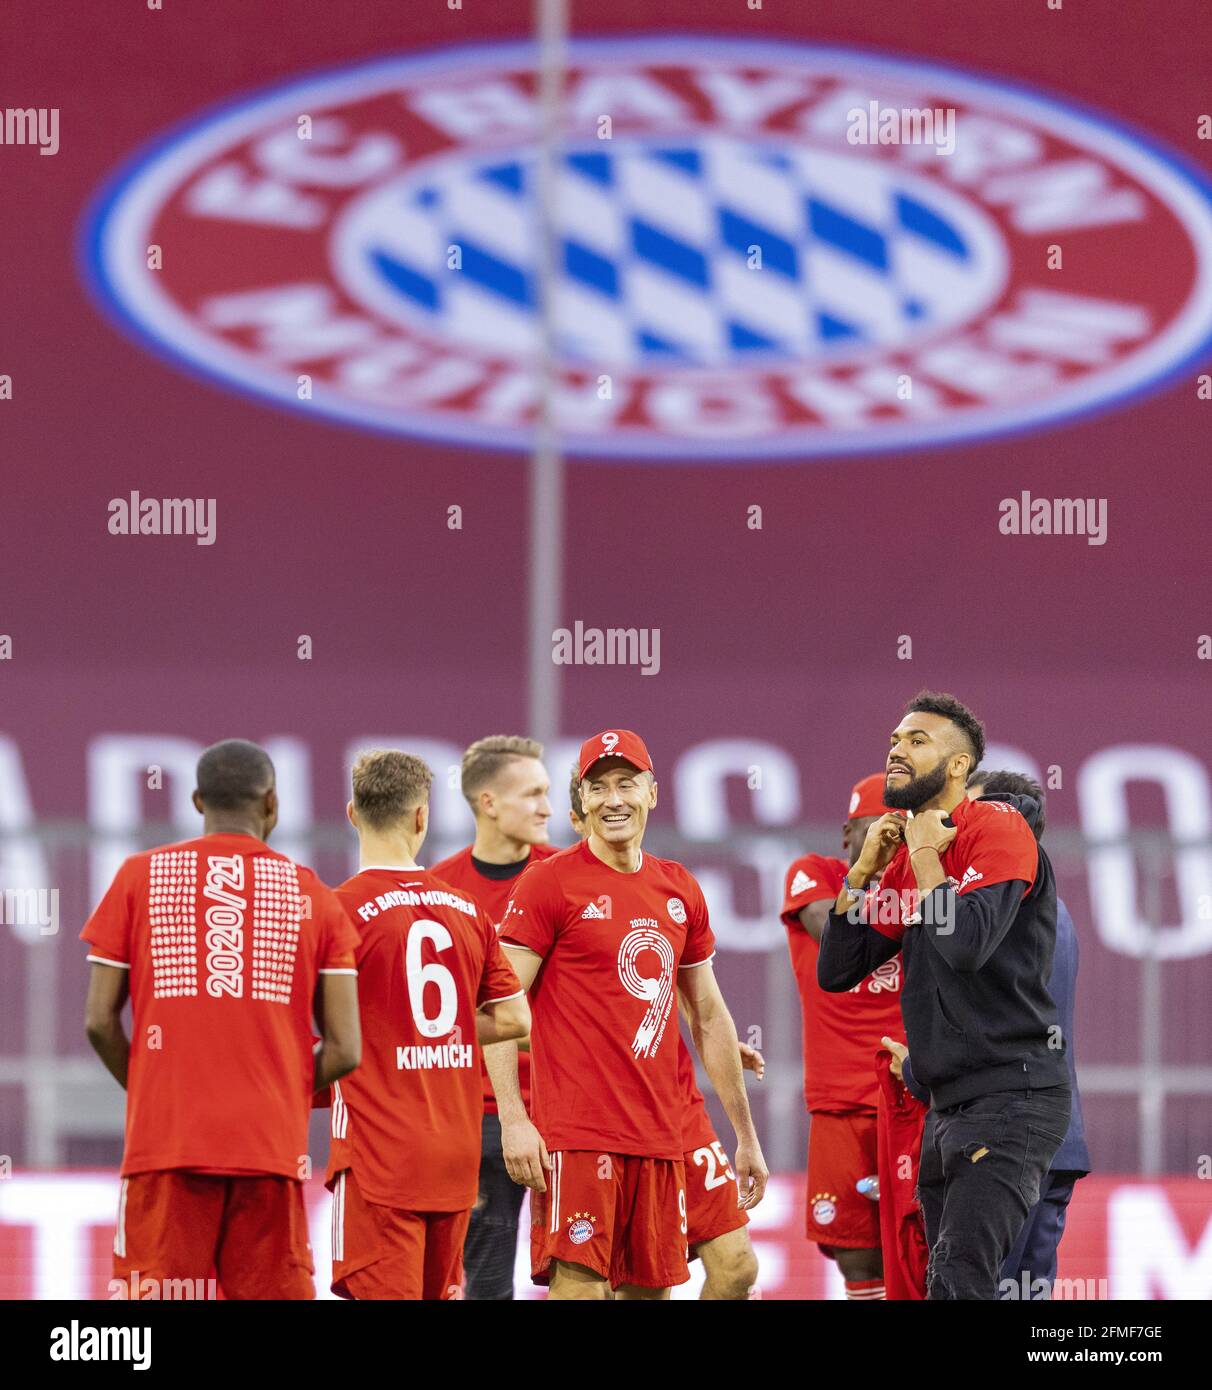 Joshua Kimmich (Muenchen), Robert Lewandowski (Muenchen), Eric Maxim Choupo-Moting (Muenchen)  in the match FC BAYERN MUENCHEN - BORUSSIA MOENCHENGLADBACH 6-0 1.German Football League on May 8, 2021 in Munich, Germany  Season 2020/2021, matchday 32, 1.Bundesliga, FCB, München, 32.Spieltag, © Peter Schatz / Alamy Live News / Moritz Müller/Pool   - DFL REGULATIONS PROHIBIT ANY USE OF PHOTOGRAPHS as IMAGE SEQUENCES and/or QUASI-VIDEO - Stock Photo